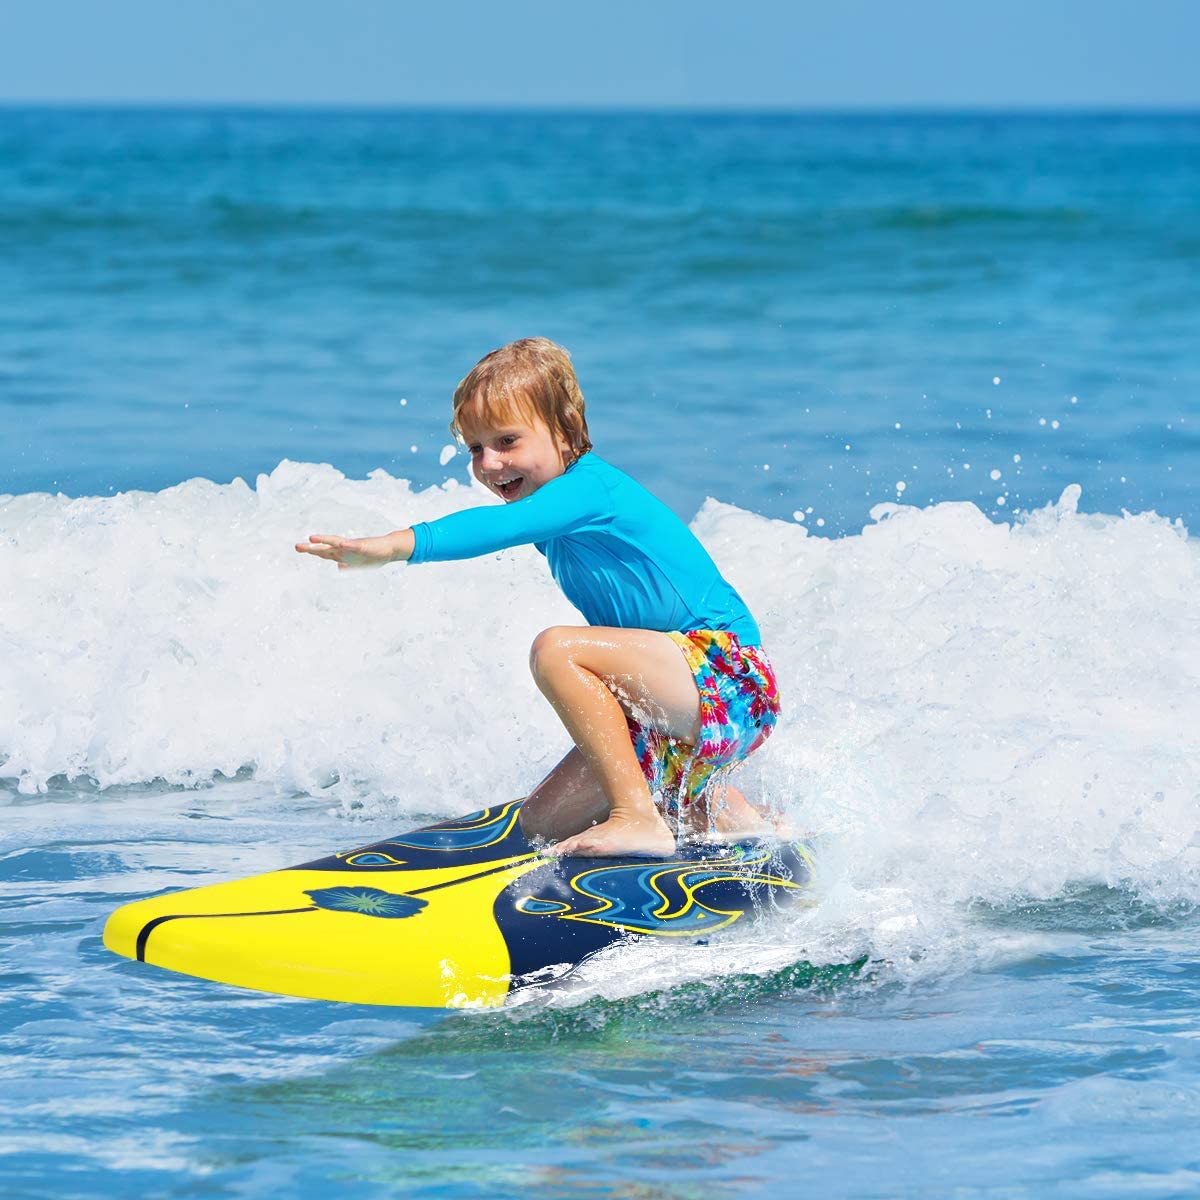 SKONYON 6' Surfboard Surfing Surf Beach Ocean Body Foamie Board with Removable Fins Great Beginner Board for Kids Adults and Children